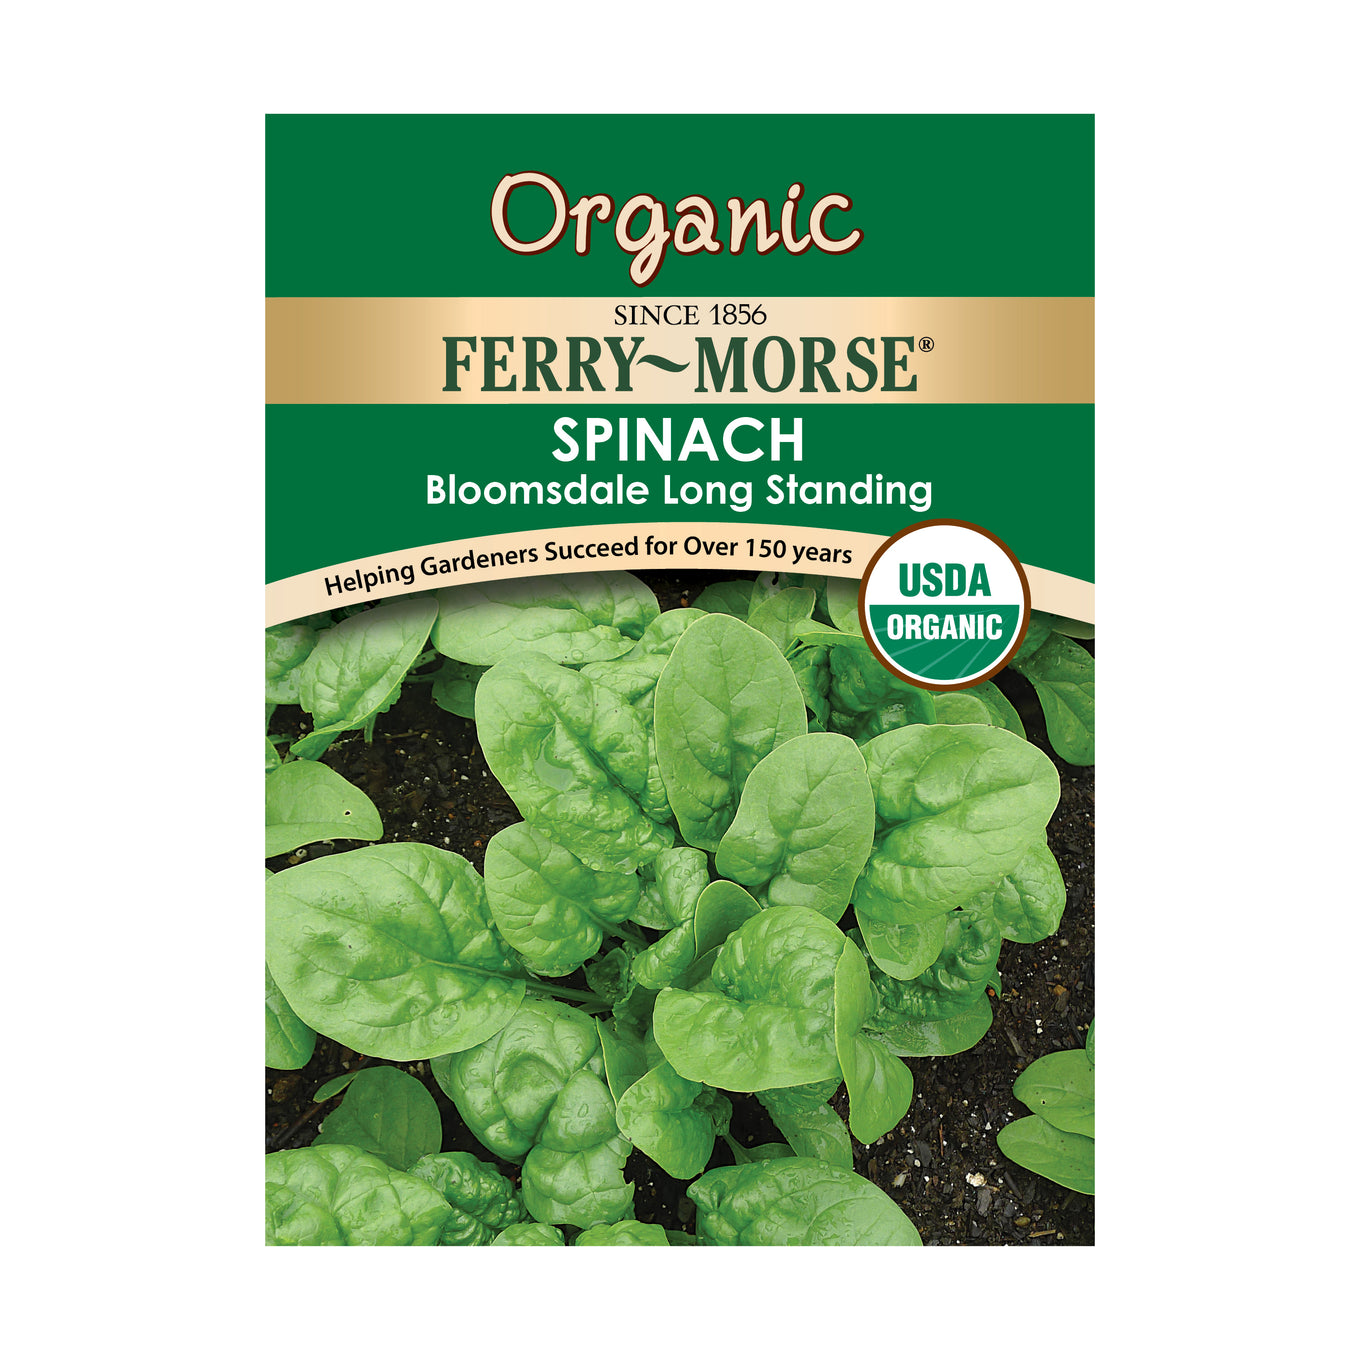 Image of the front of Organic Bloomsdale Long Standing Spinach seeds packet.